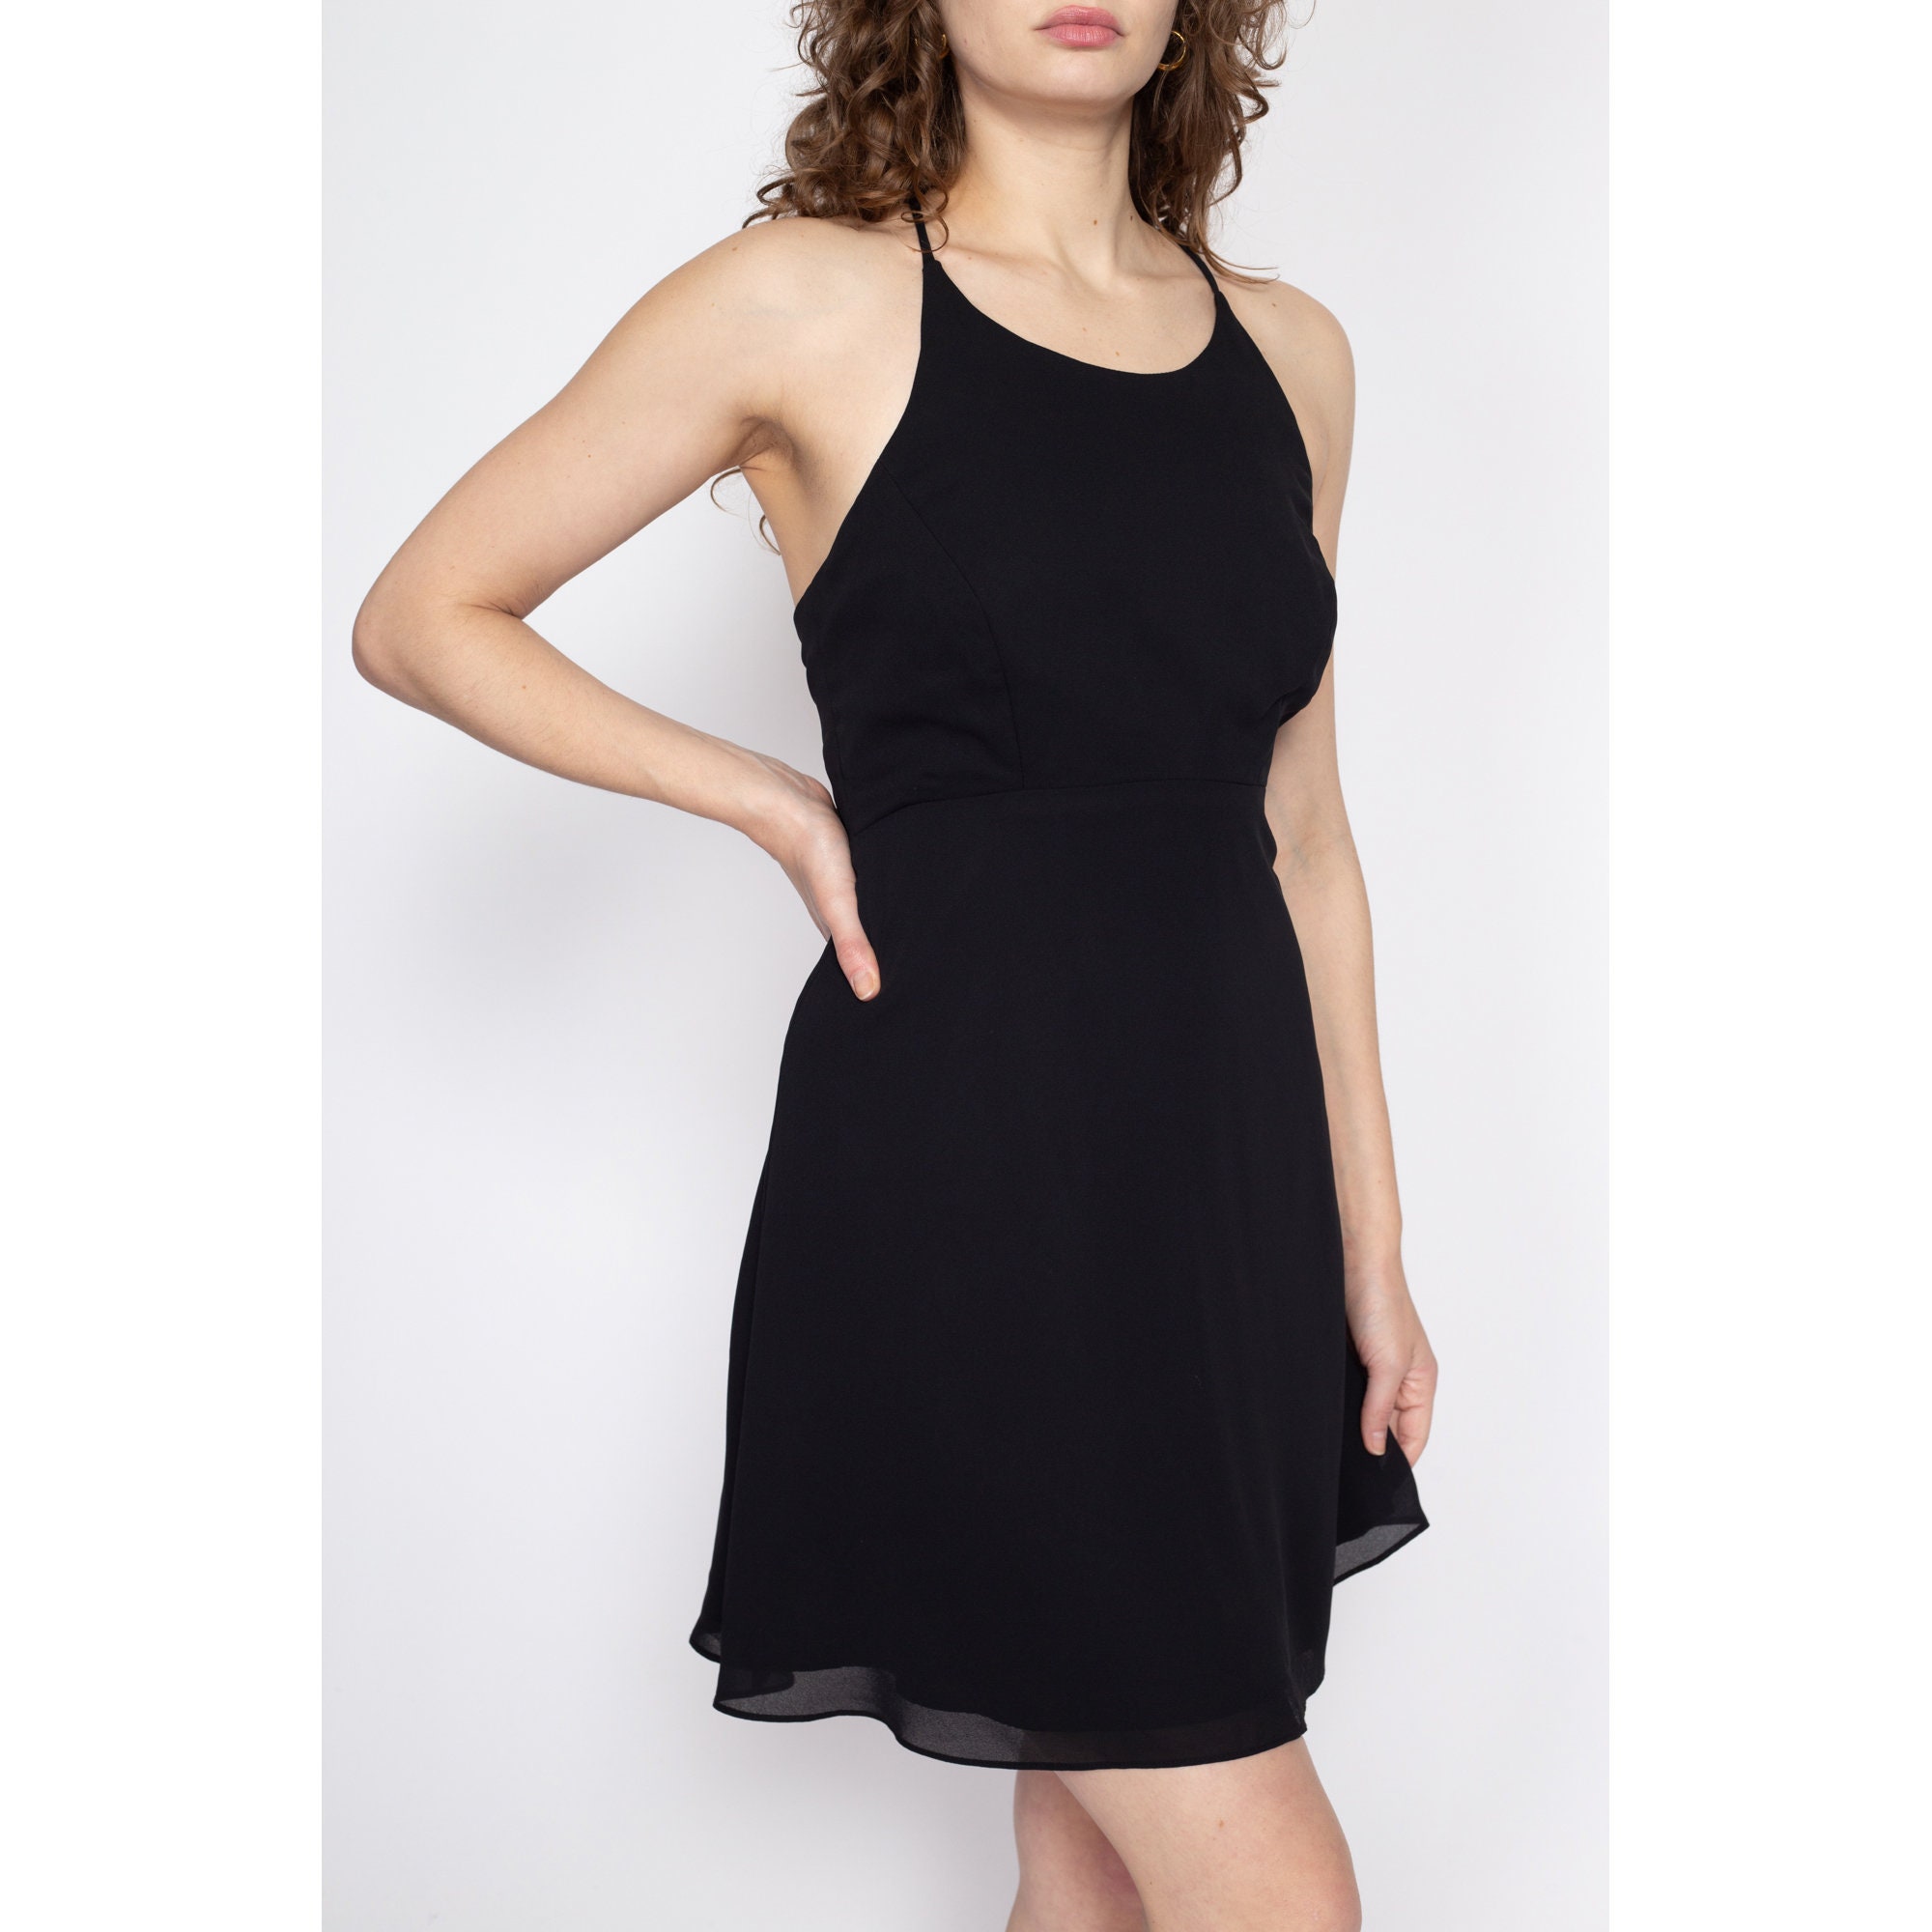 Istyle Can Dress For Women A Line Dress With Shoulder, 40% OFF